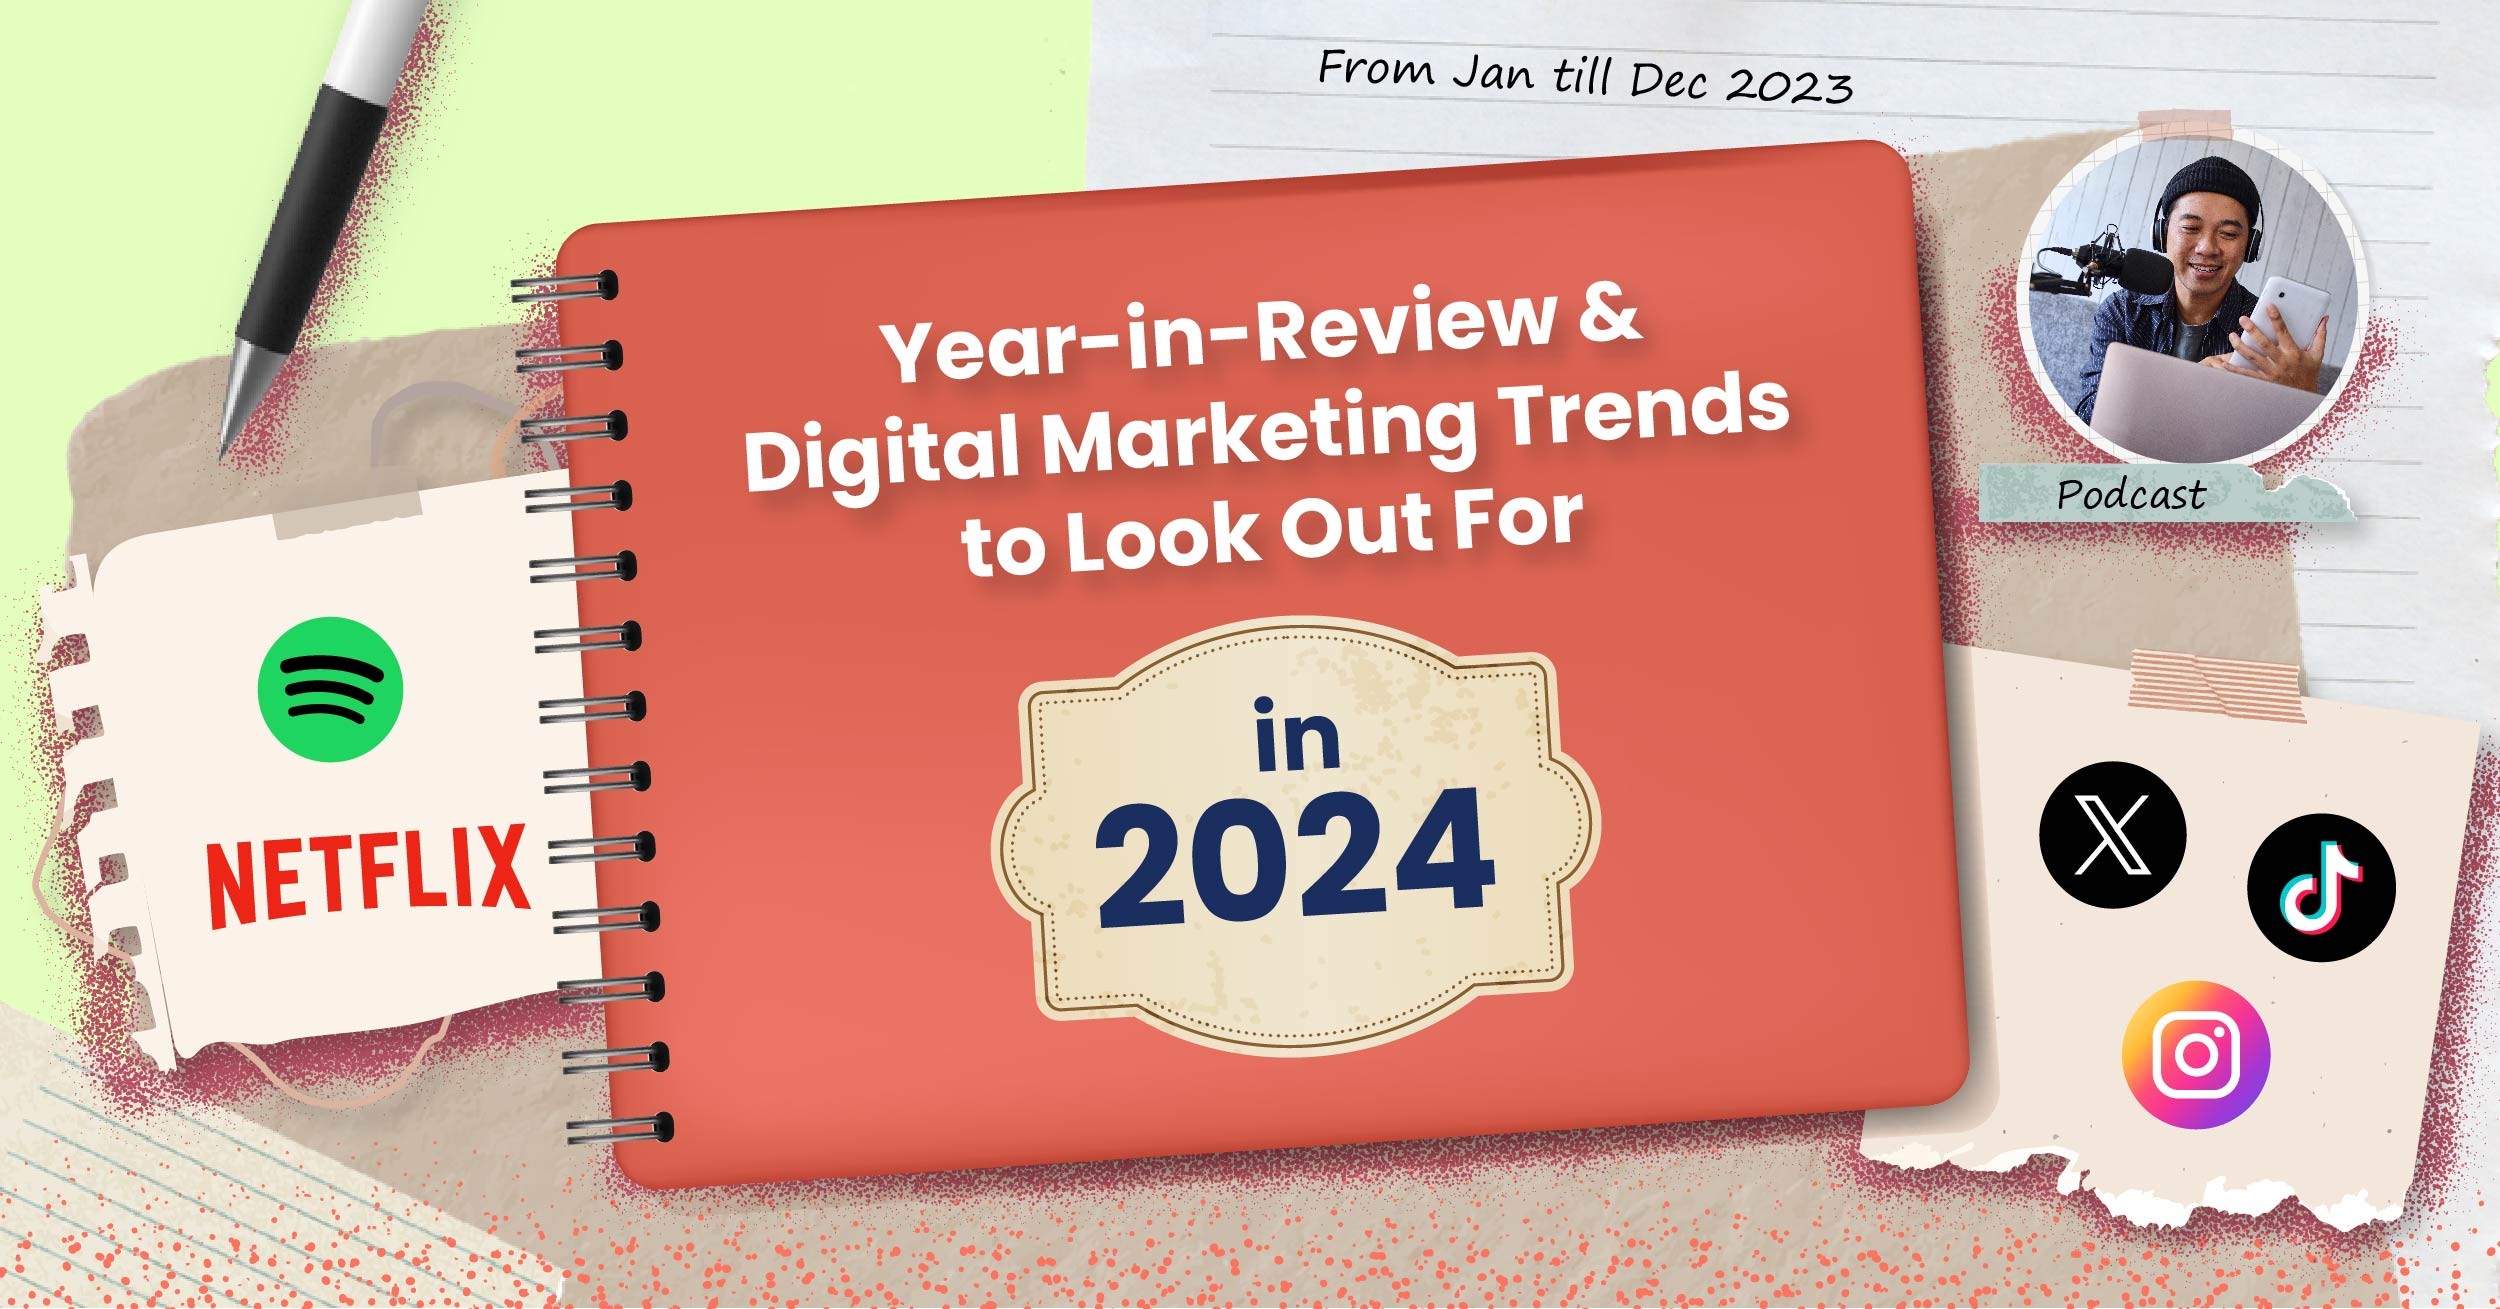 Year-in-Review & Digital Marketing Trends to Look Out for in 2024